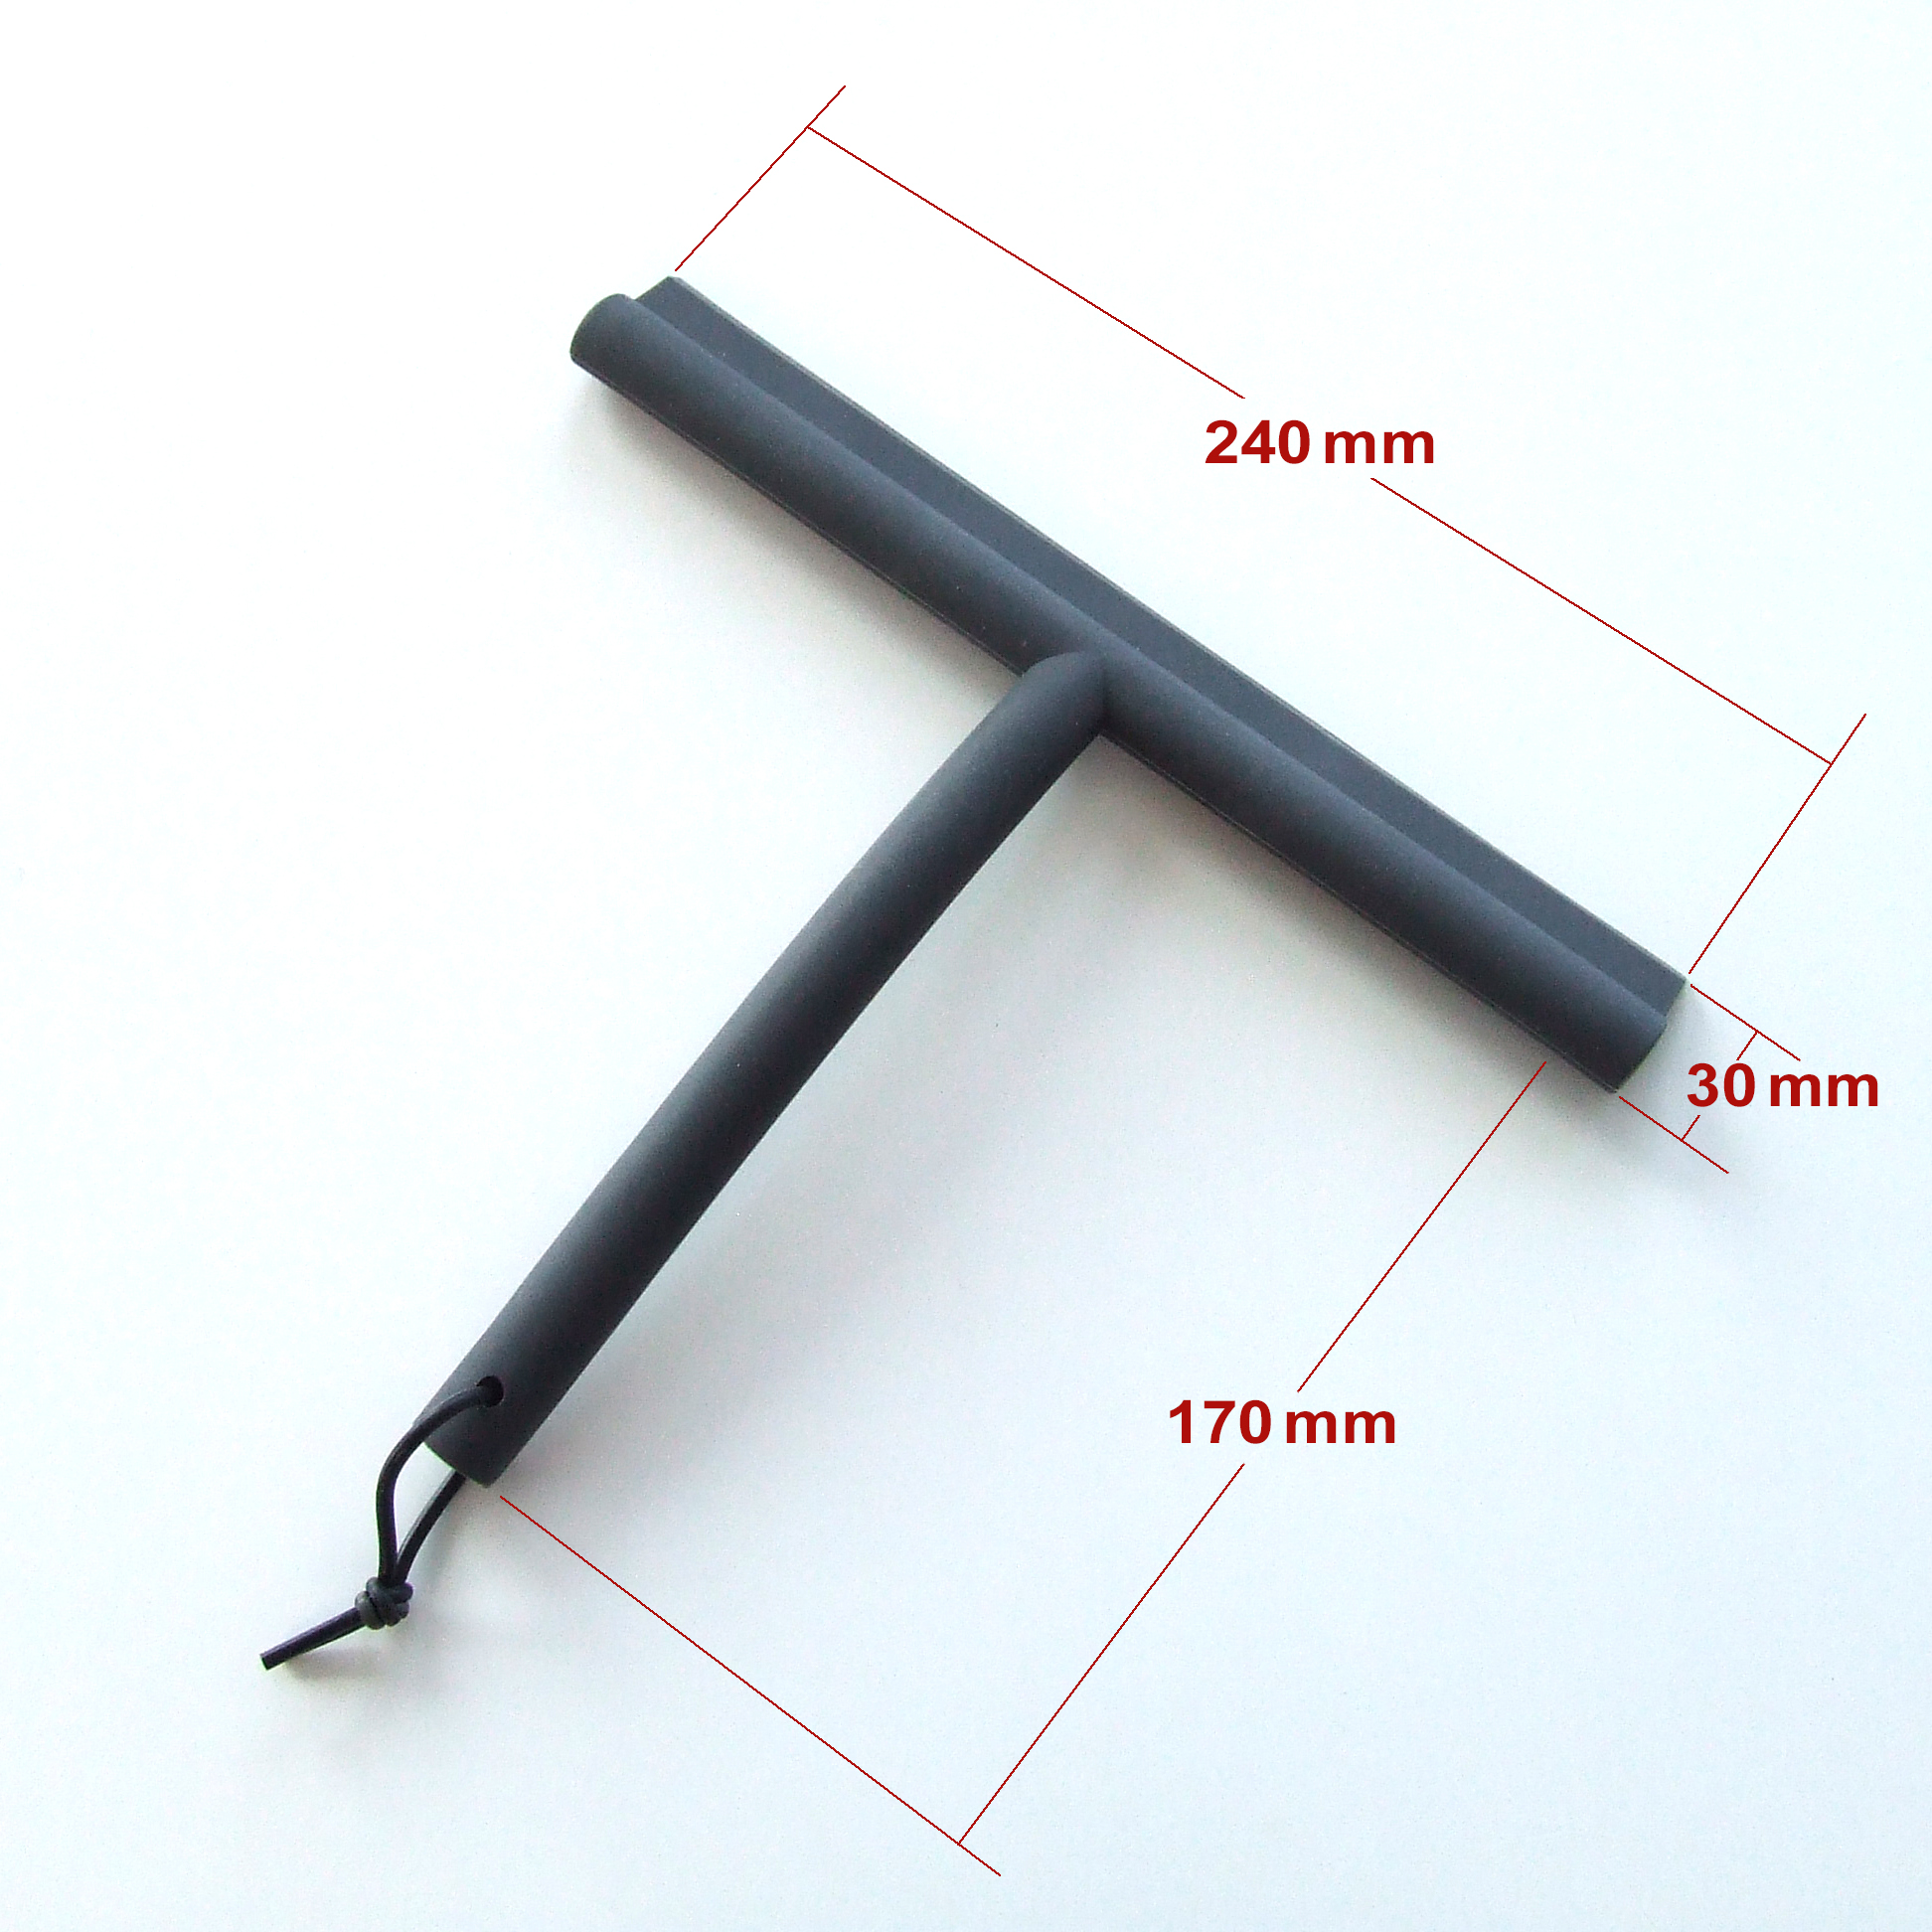 Squeegee of stainless steel covered by silicone - Drawing